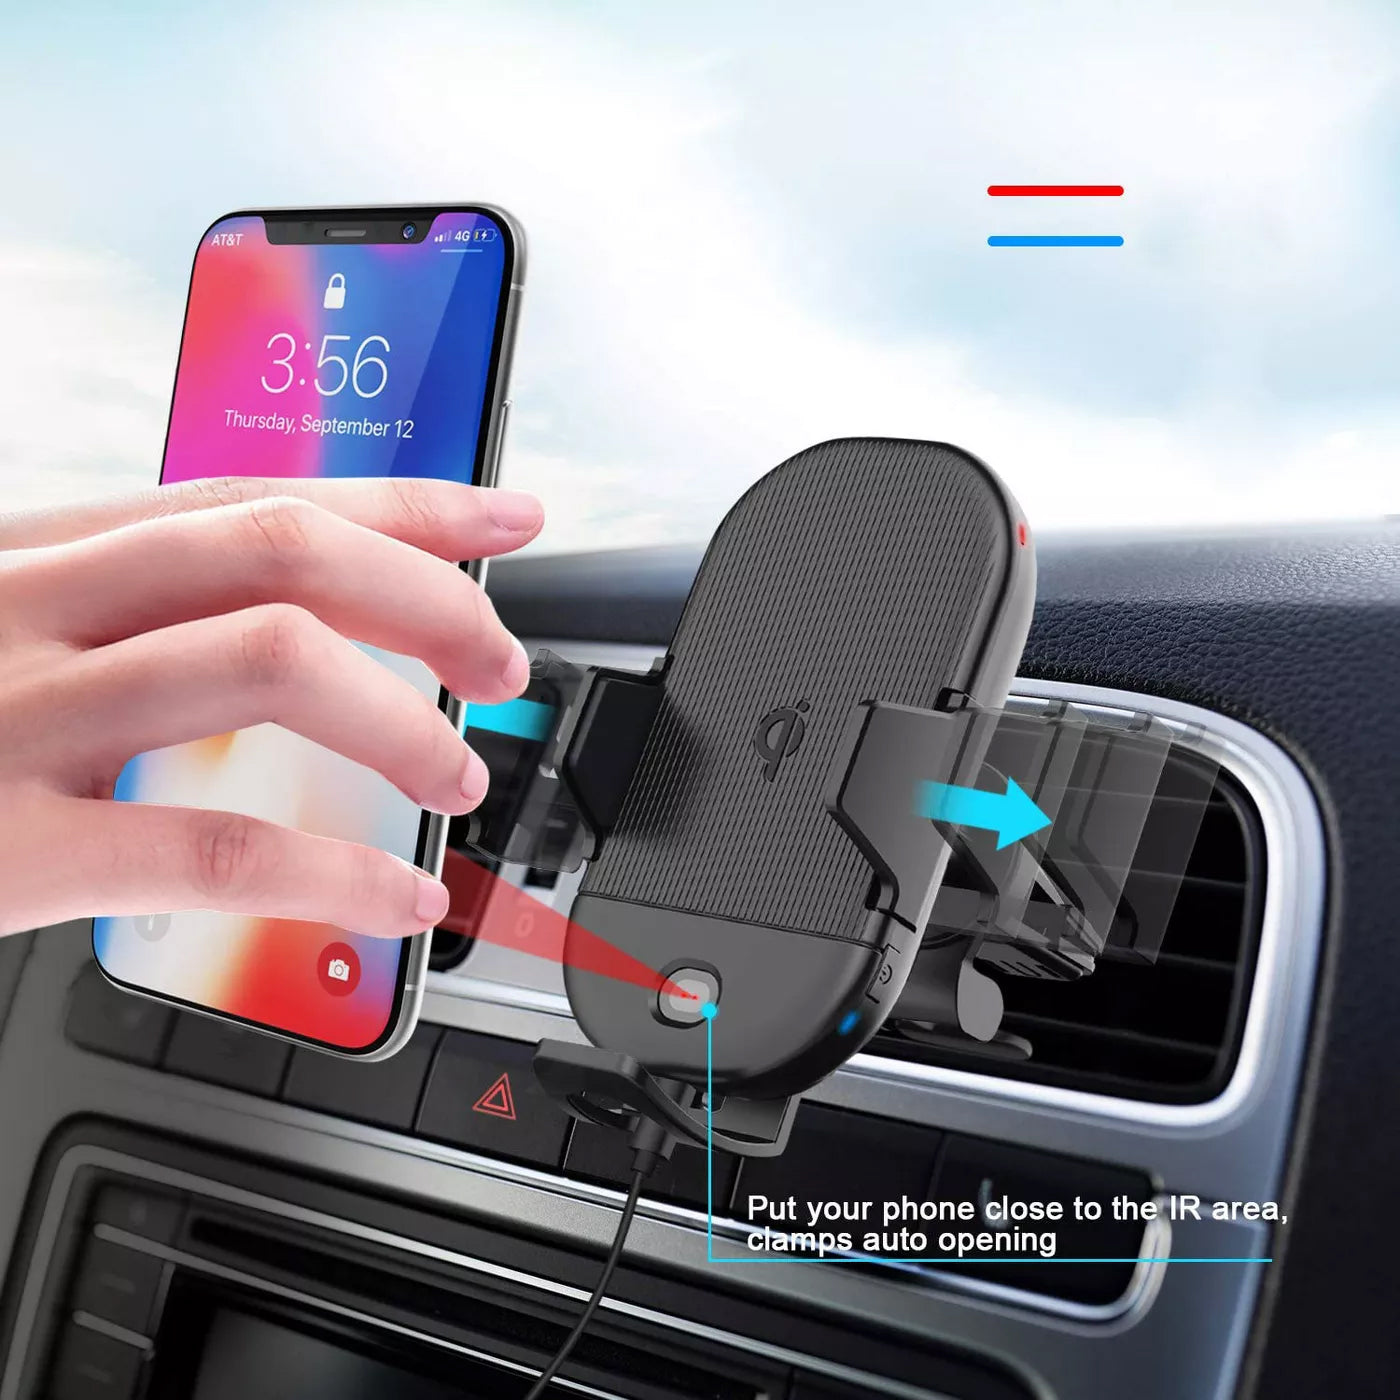 Car Wireless Charger Mount, Dock Cradle Fast Charge Holder Air Vent - NWZ08